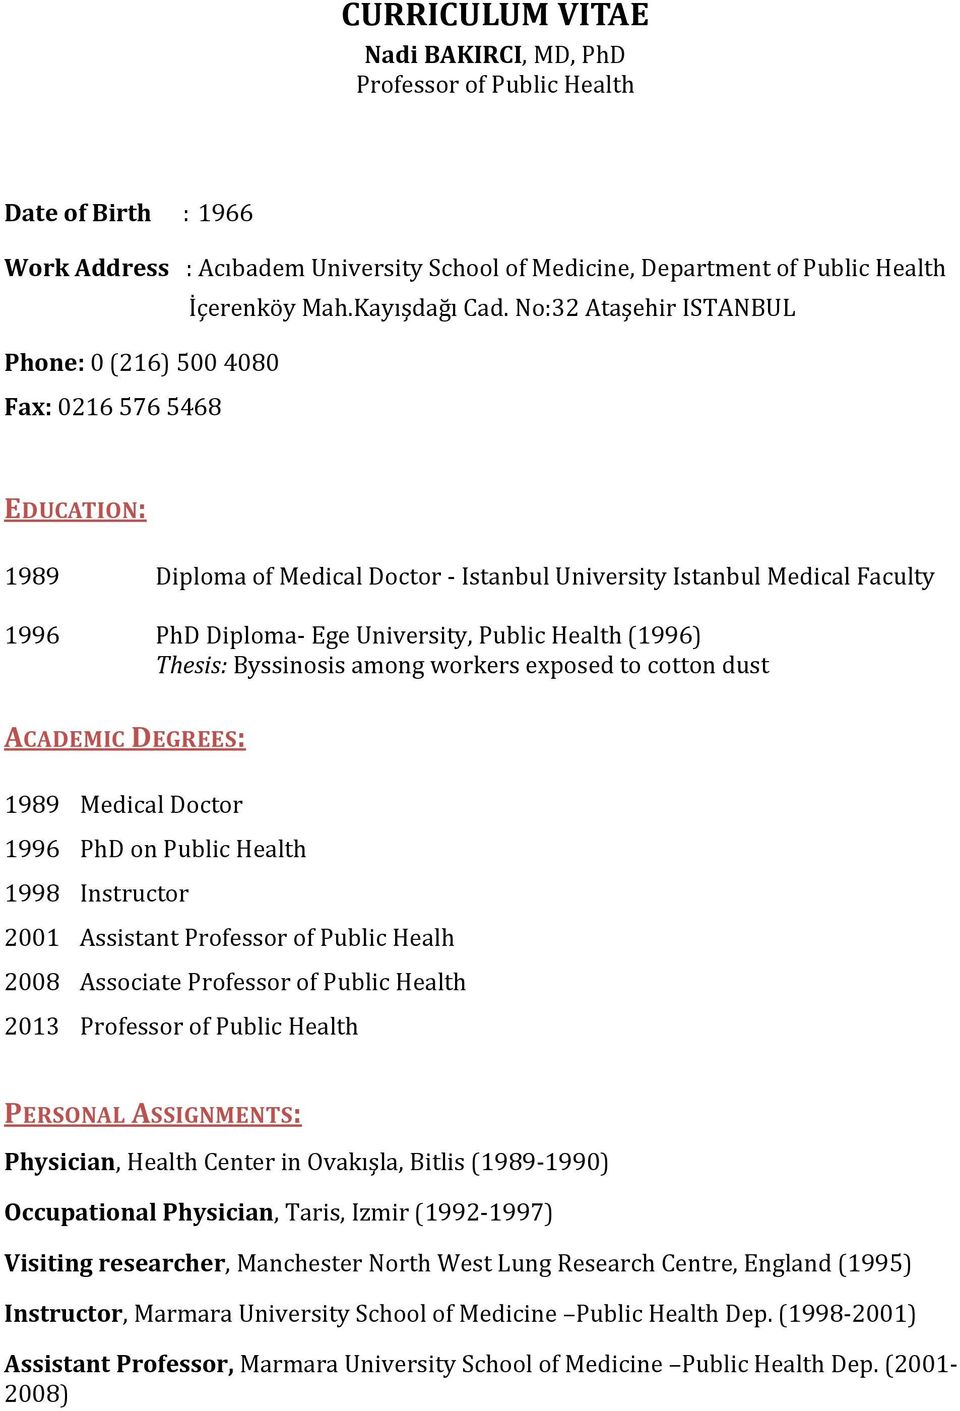 Health (1996) Thesis: Byssinosis among workers exposed to cotton dust ACADEMIC DEGREES: 1989 Medical Doctor 1996 PhD on Public Health 1998 Instructor 2001 Assistant Professor of Public Healh 2008